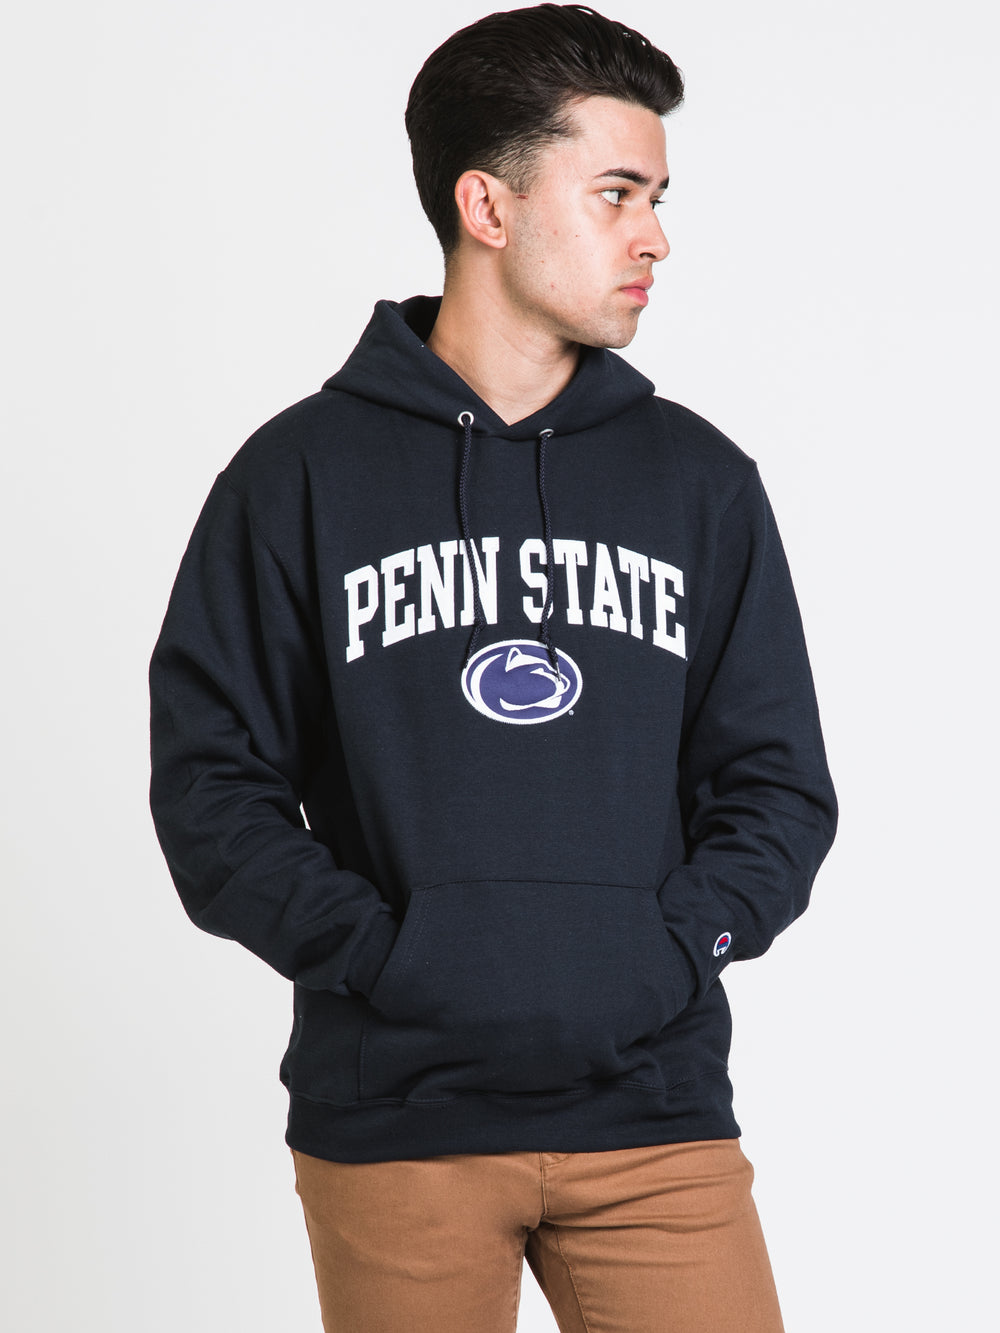 CHAMPION ECO POWERBLEND PENN STATE HOODIE - CLEARANCE